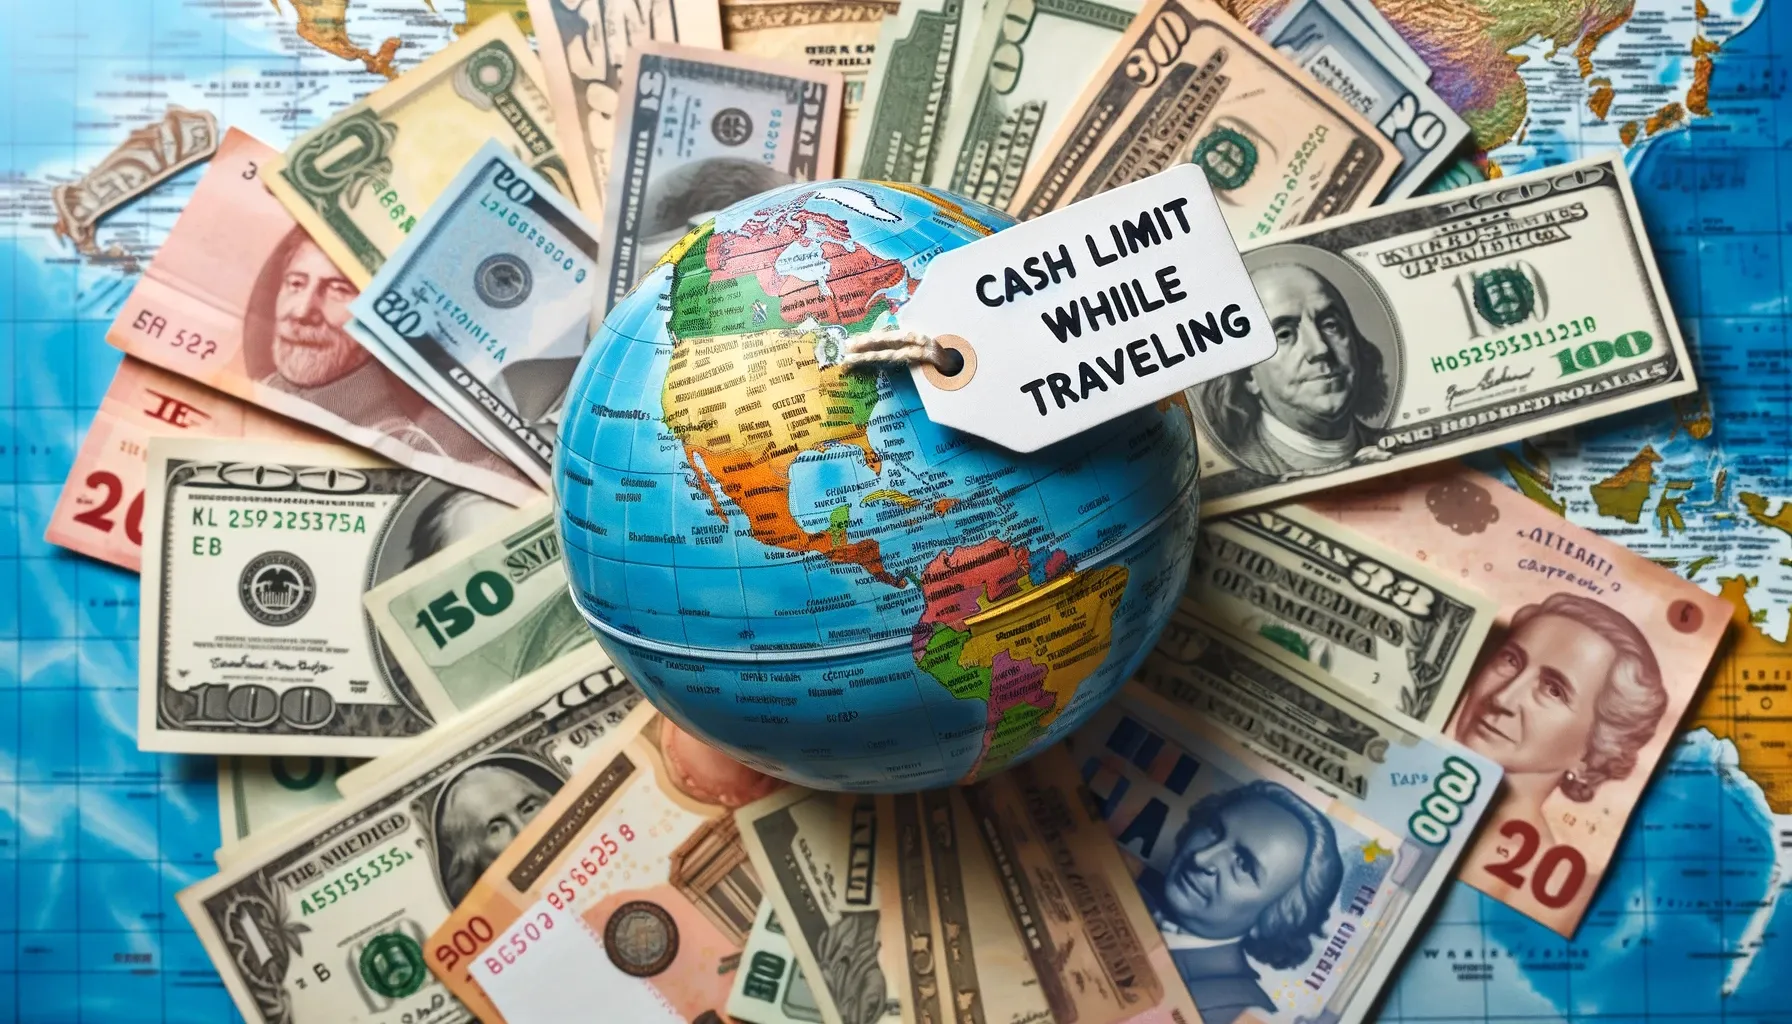 how-much-cash-can-you-legally-carry-while-travelling-abroad-title